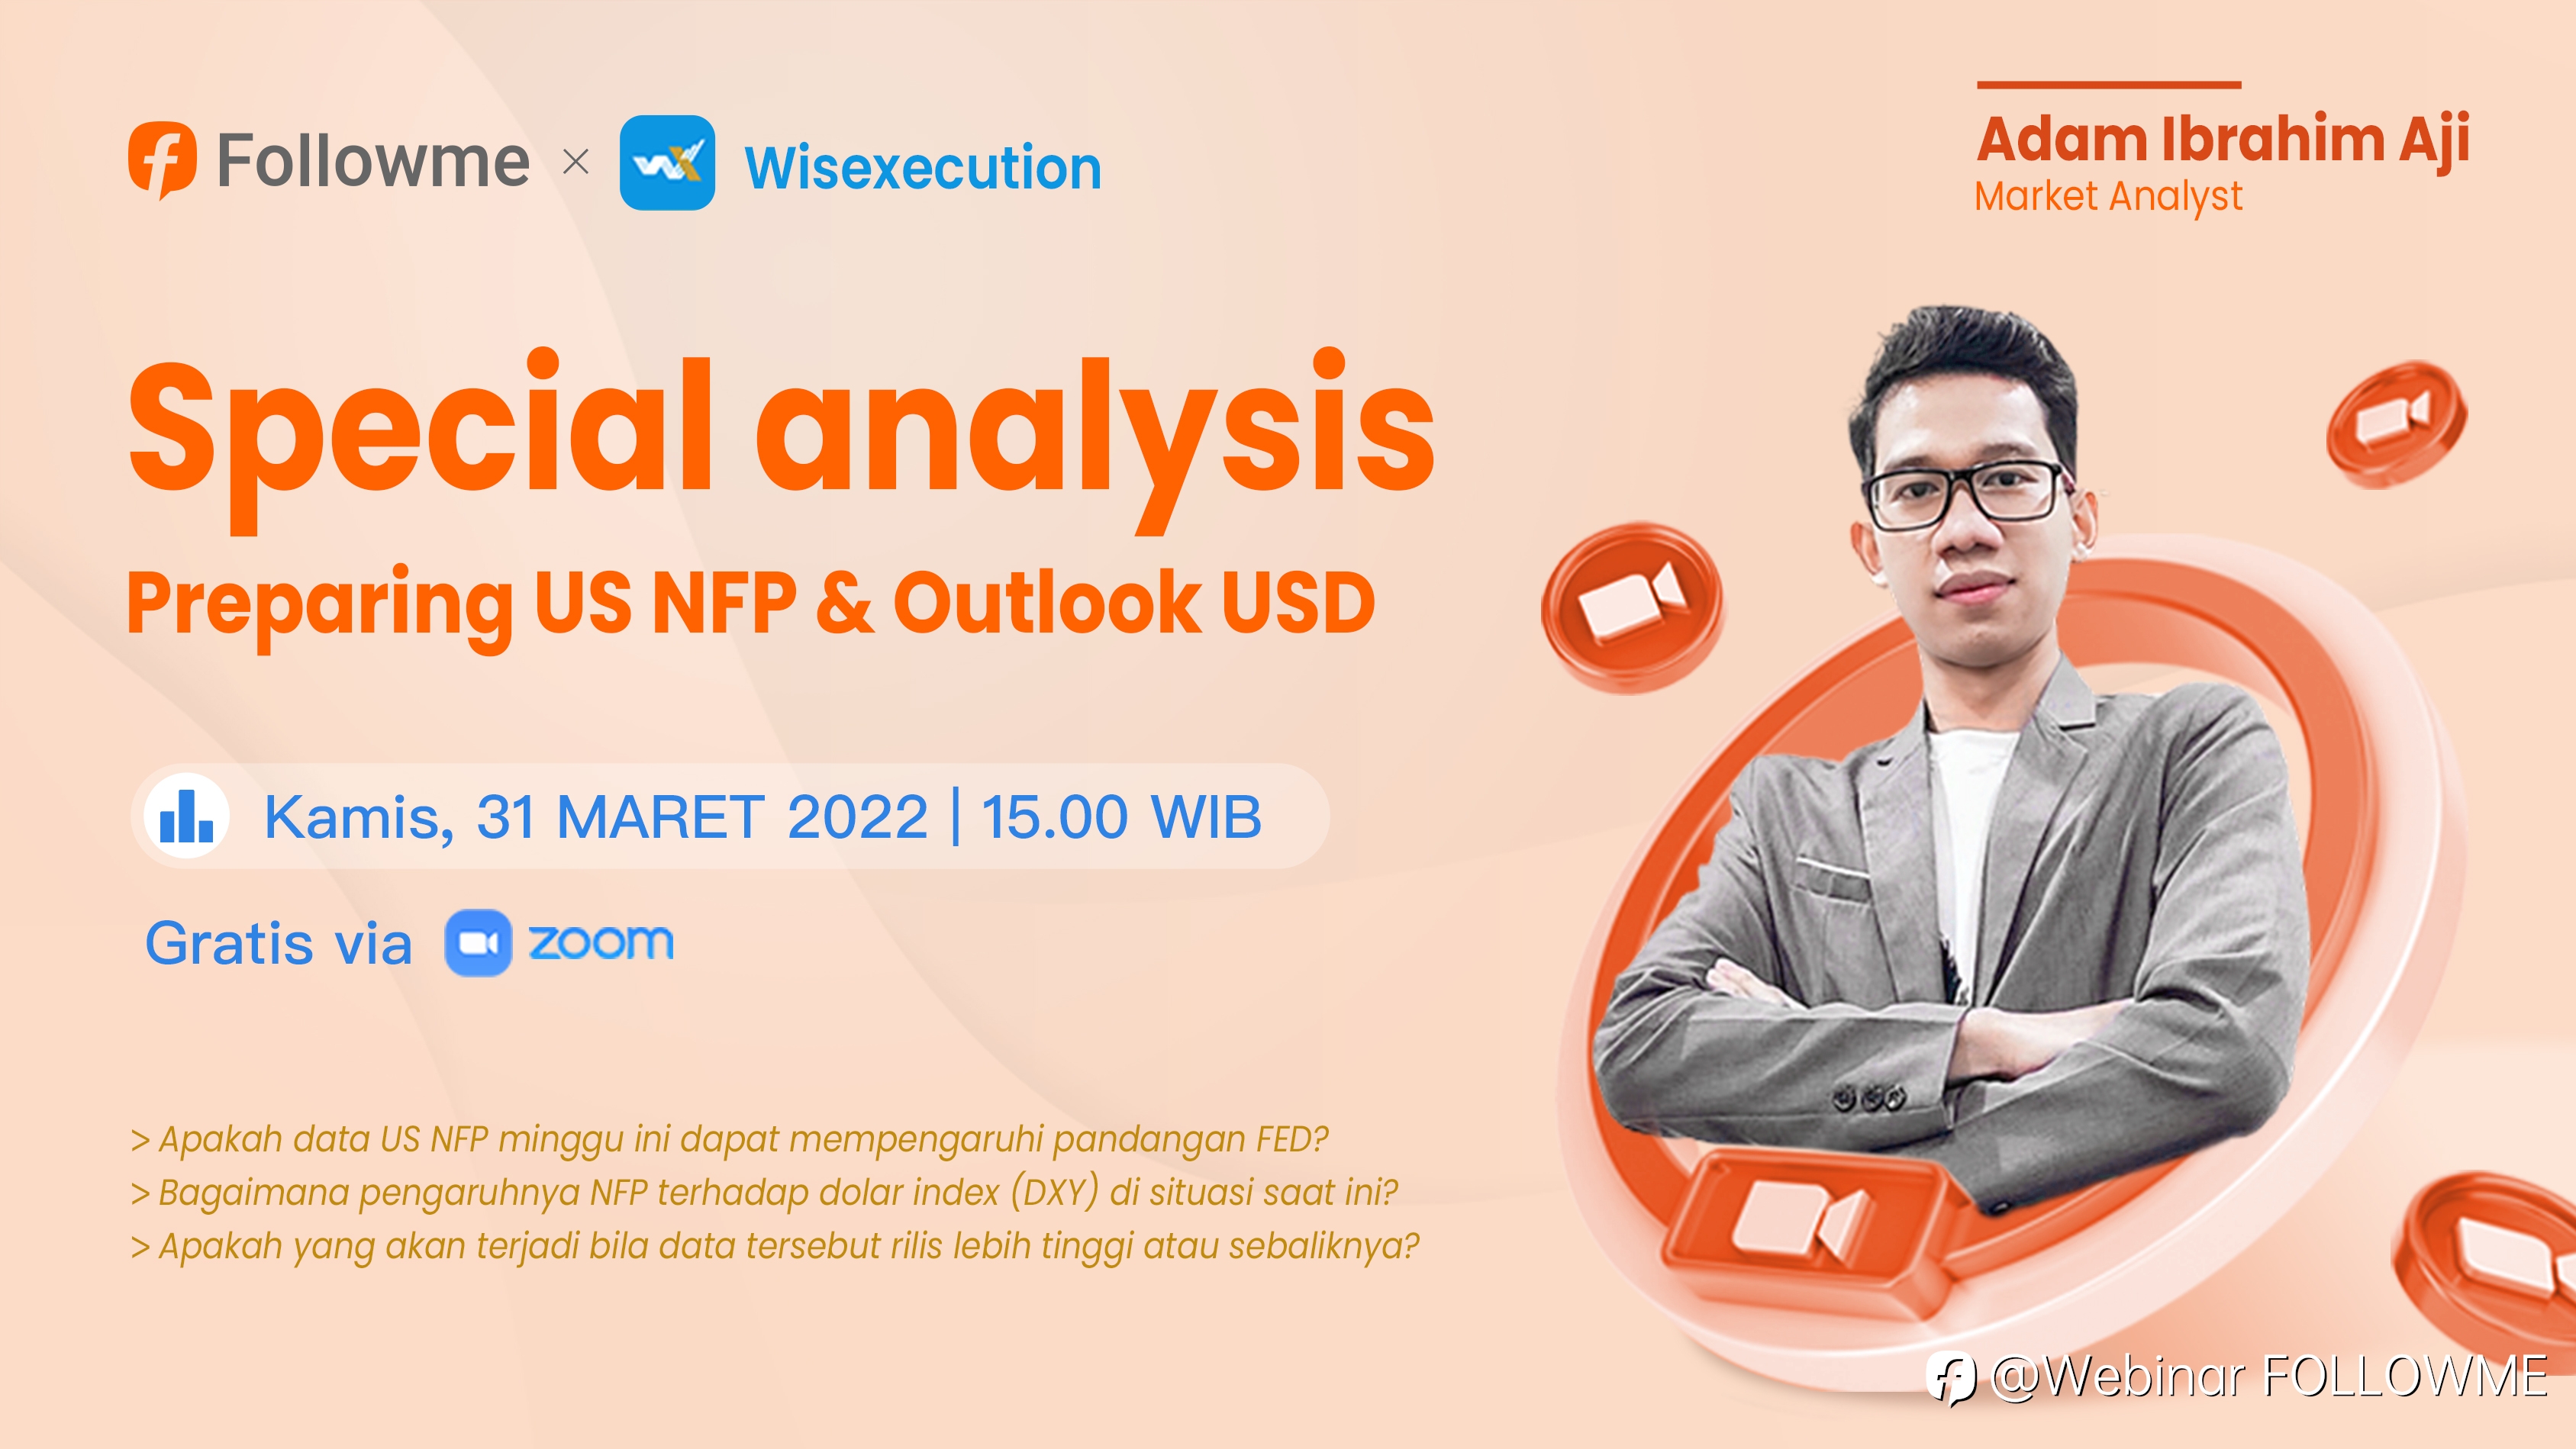 FOLLOWME & WX Trading Webinar：Special analysis Preparing US NFP & Outlook USD